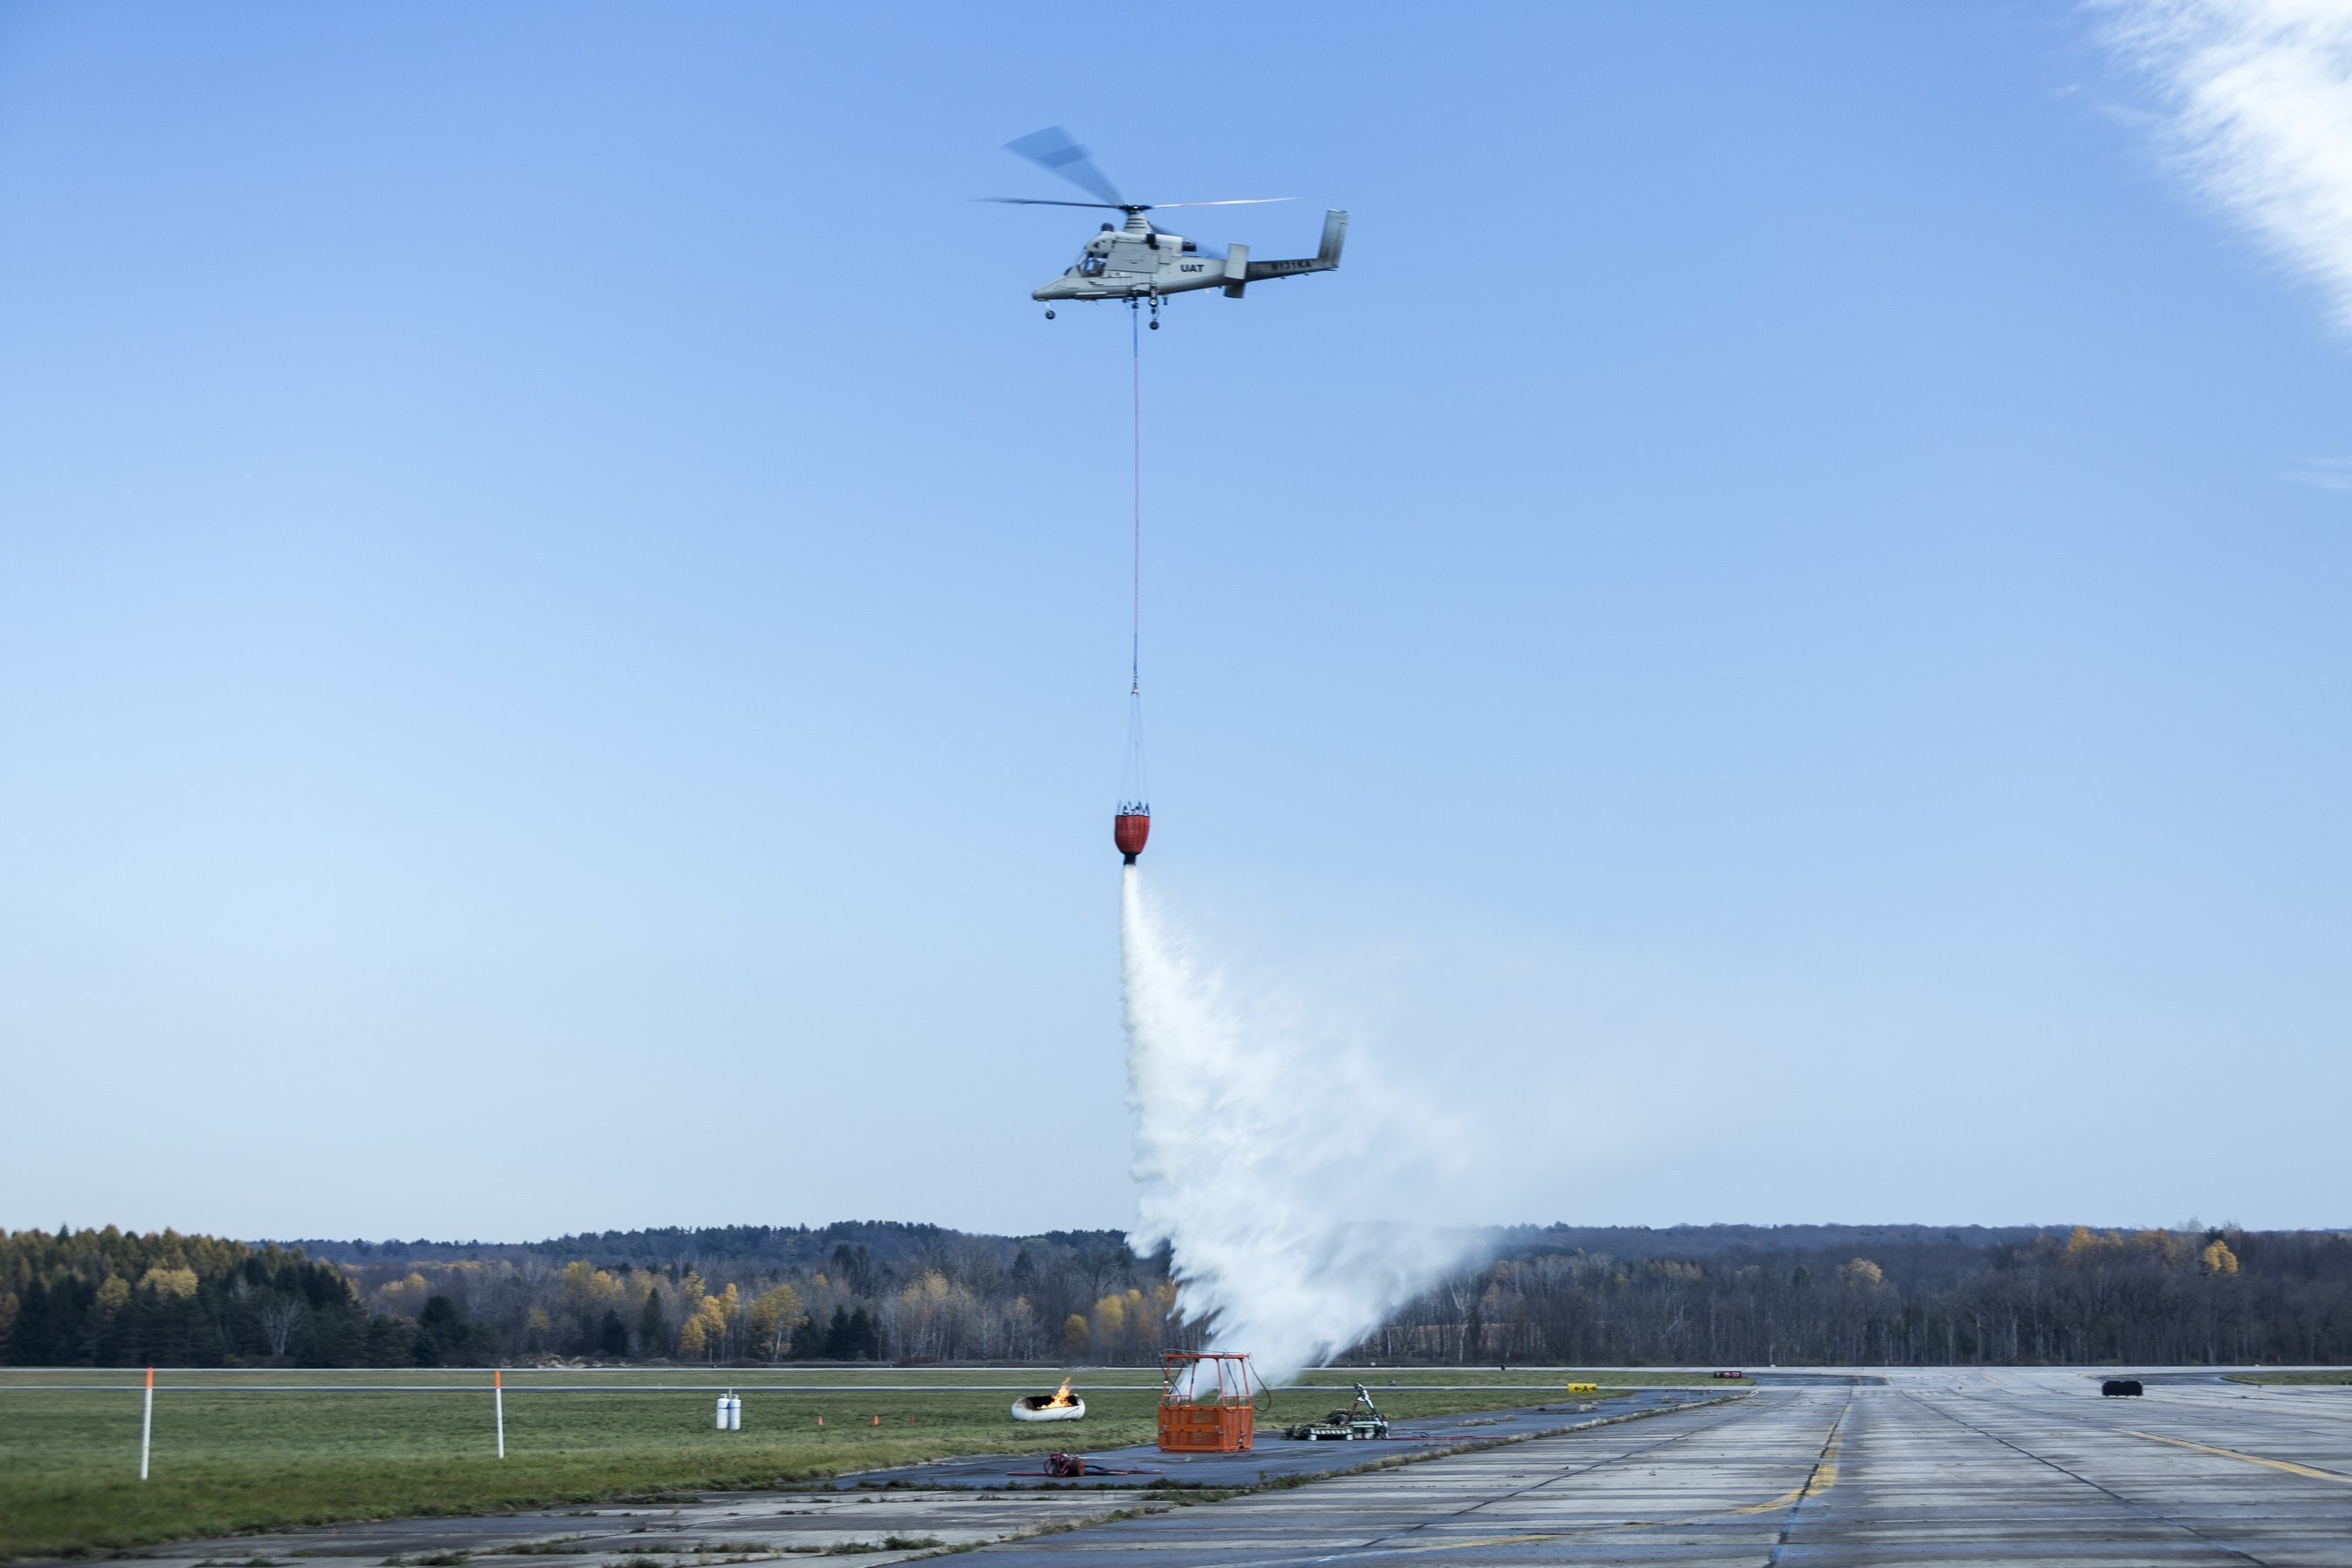 The unmanned K-MAX helicopter successfully conducted a firefighting mission during a demonstration on Nov. 6. Aided by the small unmanned Indago quad rotor, unmanned K-MAX extinguished several fires while collecting and dropping more than 24,000 pounds of water onto the flames in one hour.